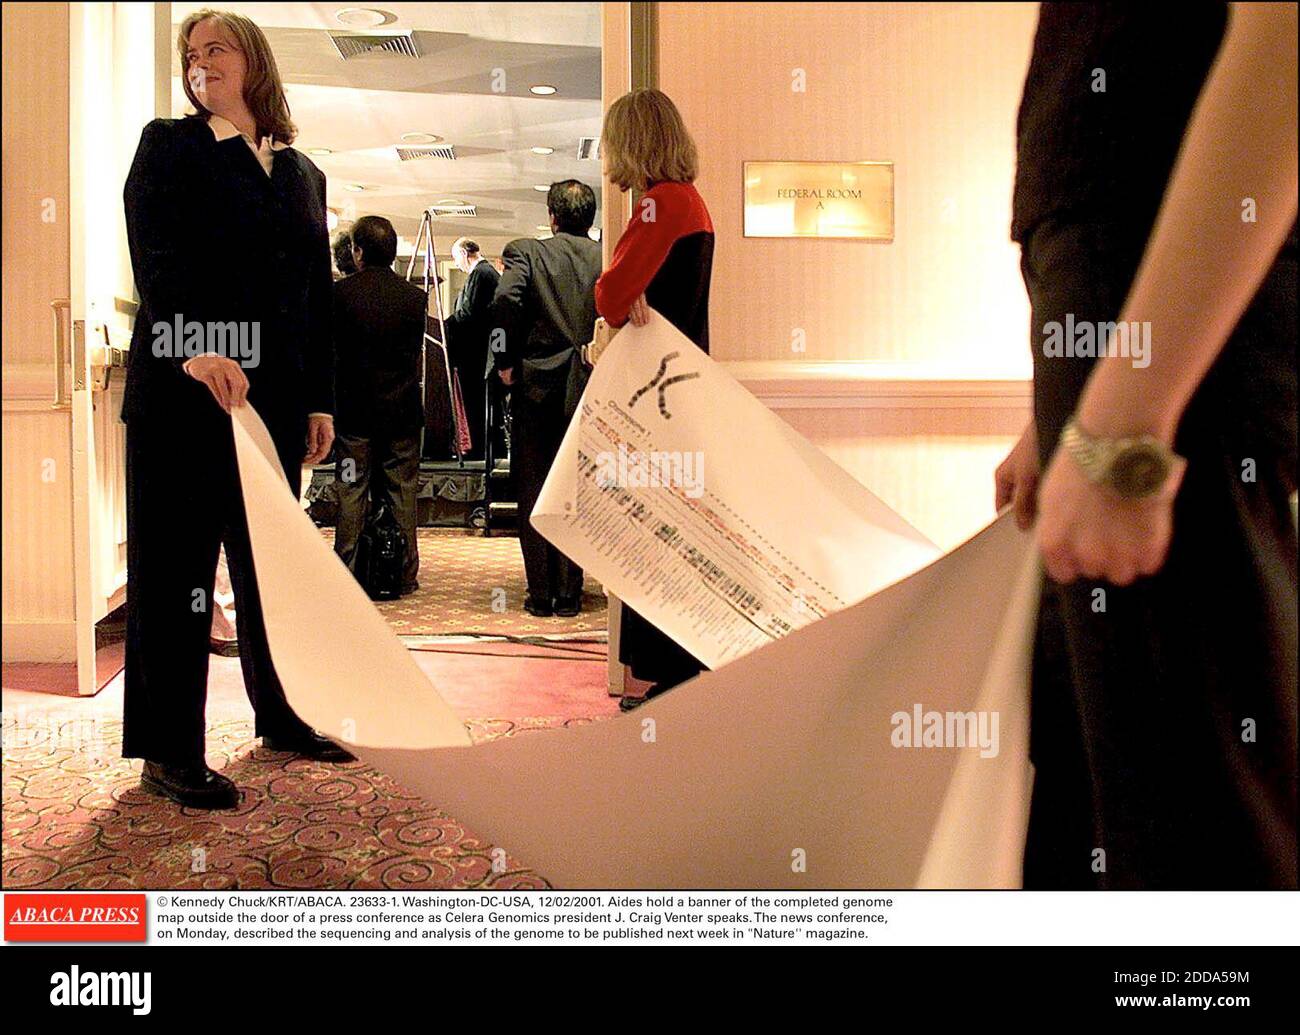 NO FILM, NO VIDEO, NO TV, NO DOCUMENTARY - © Kennedy Chuck/KRT/ABACA. 23633-1. Washington-DC-USA, 12/02/2001. Aides hold a banner of the completed genome map outside the door of a press conference as Celera Genomics president J. Craig Venter speaks. The news conference, on Monday, described the se Stock Photo